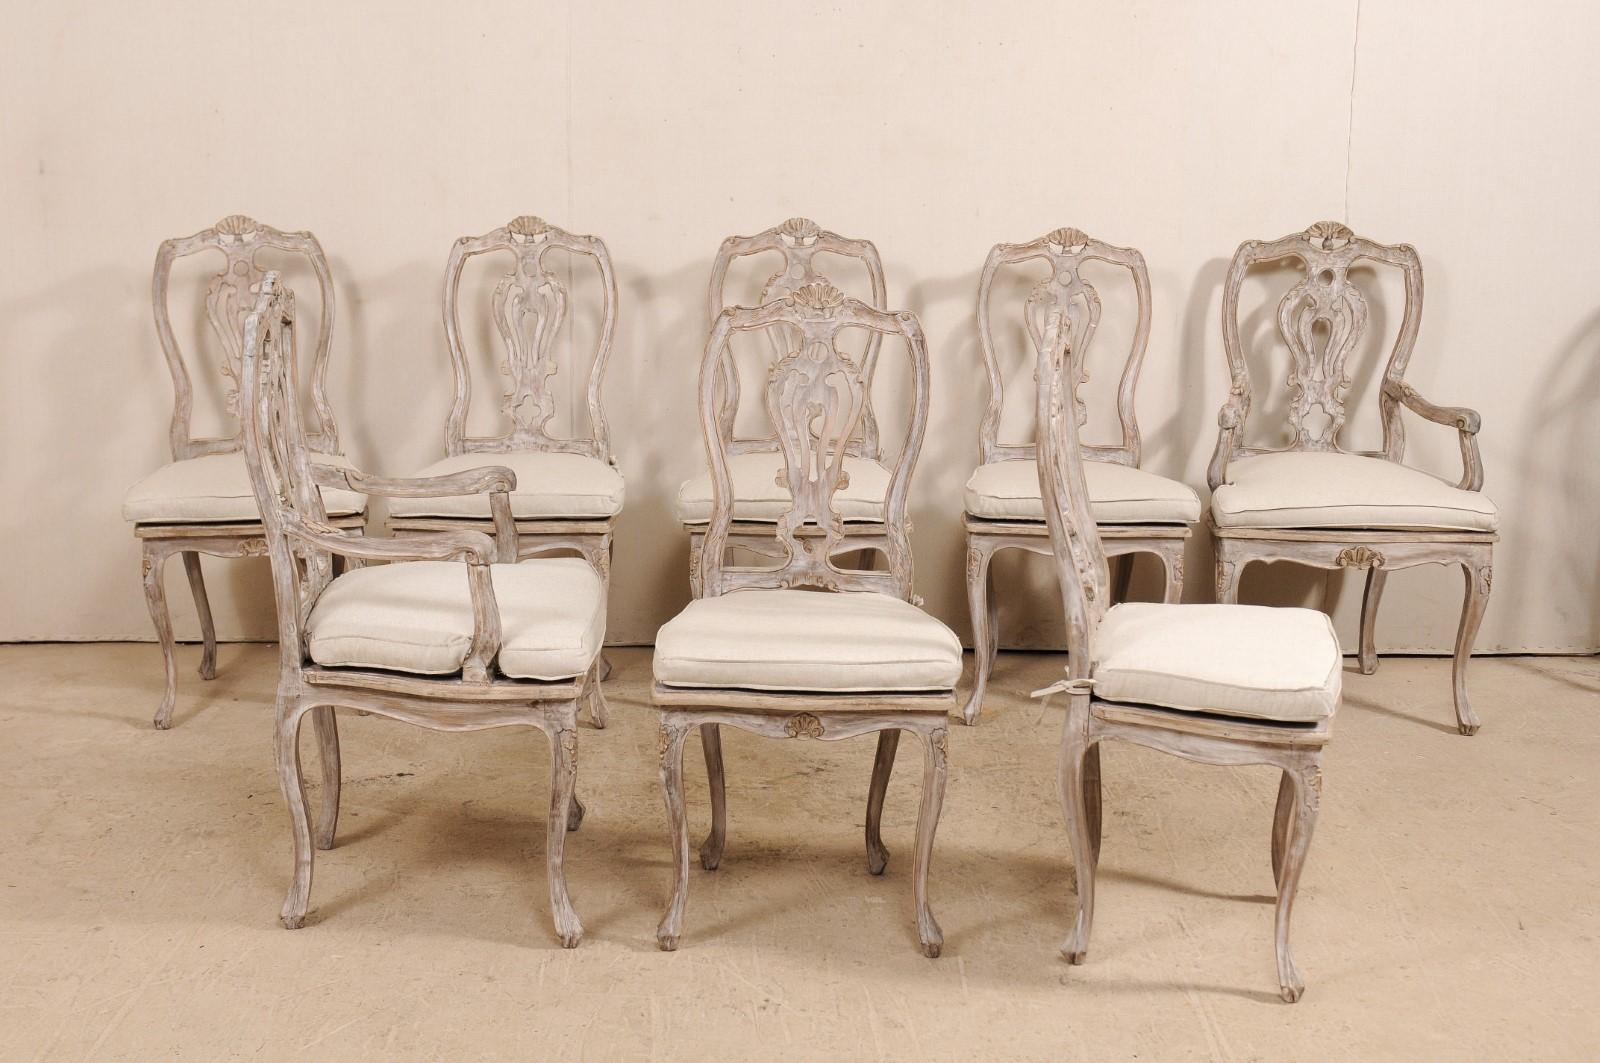 A set of eight Italian midcentury carved dining chairs with cane seats, and custom seat cushions. This set of eight chairs from Italy is comprised of a pair of arm chairs along with six side chairs. Each chair features a shapely wood back and top